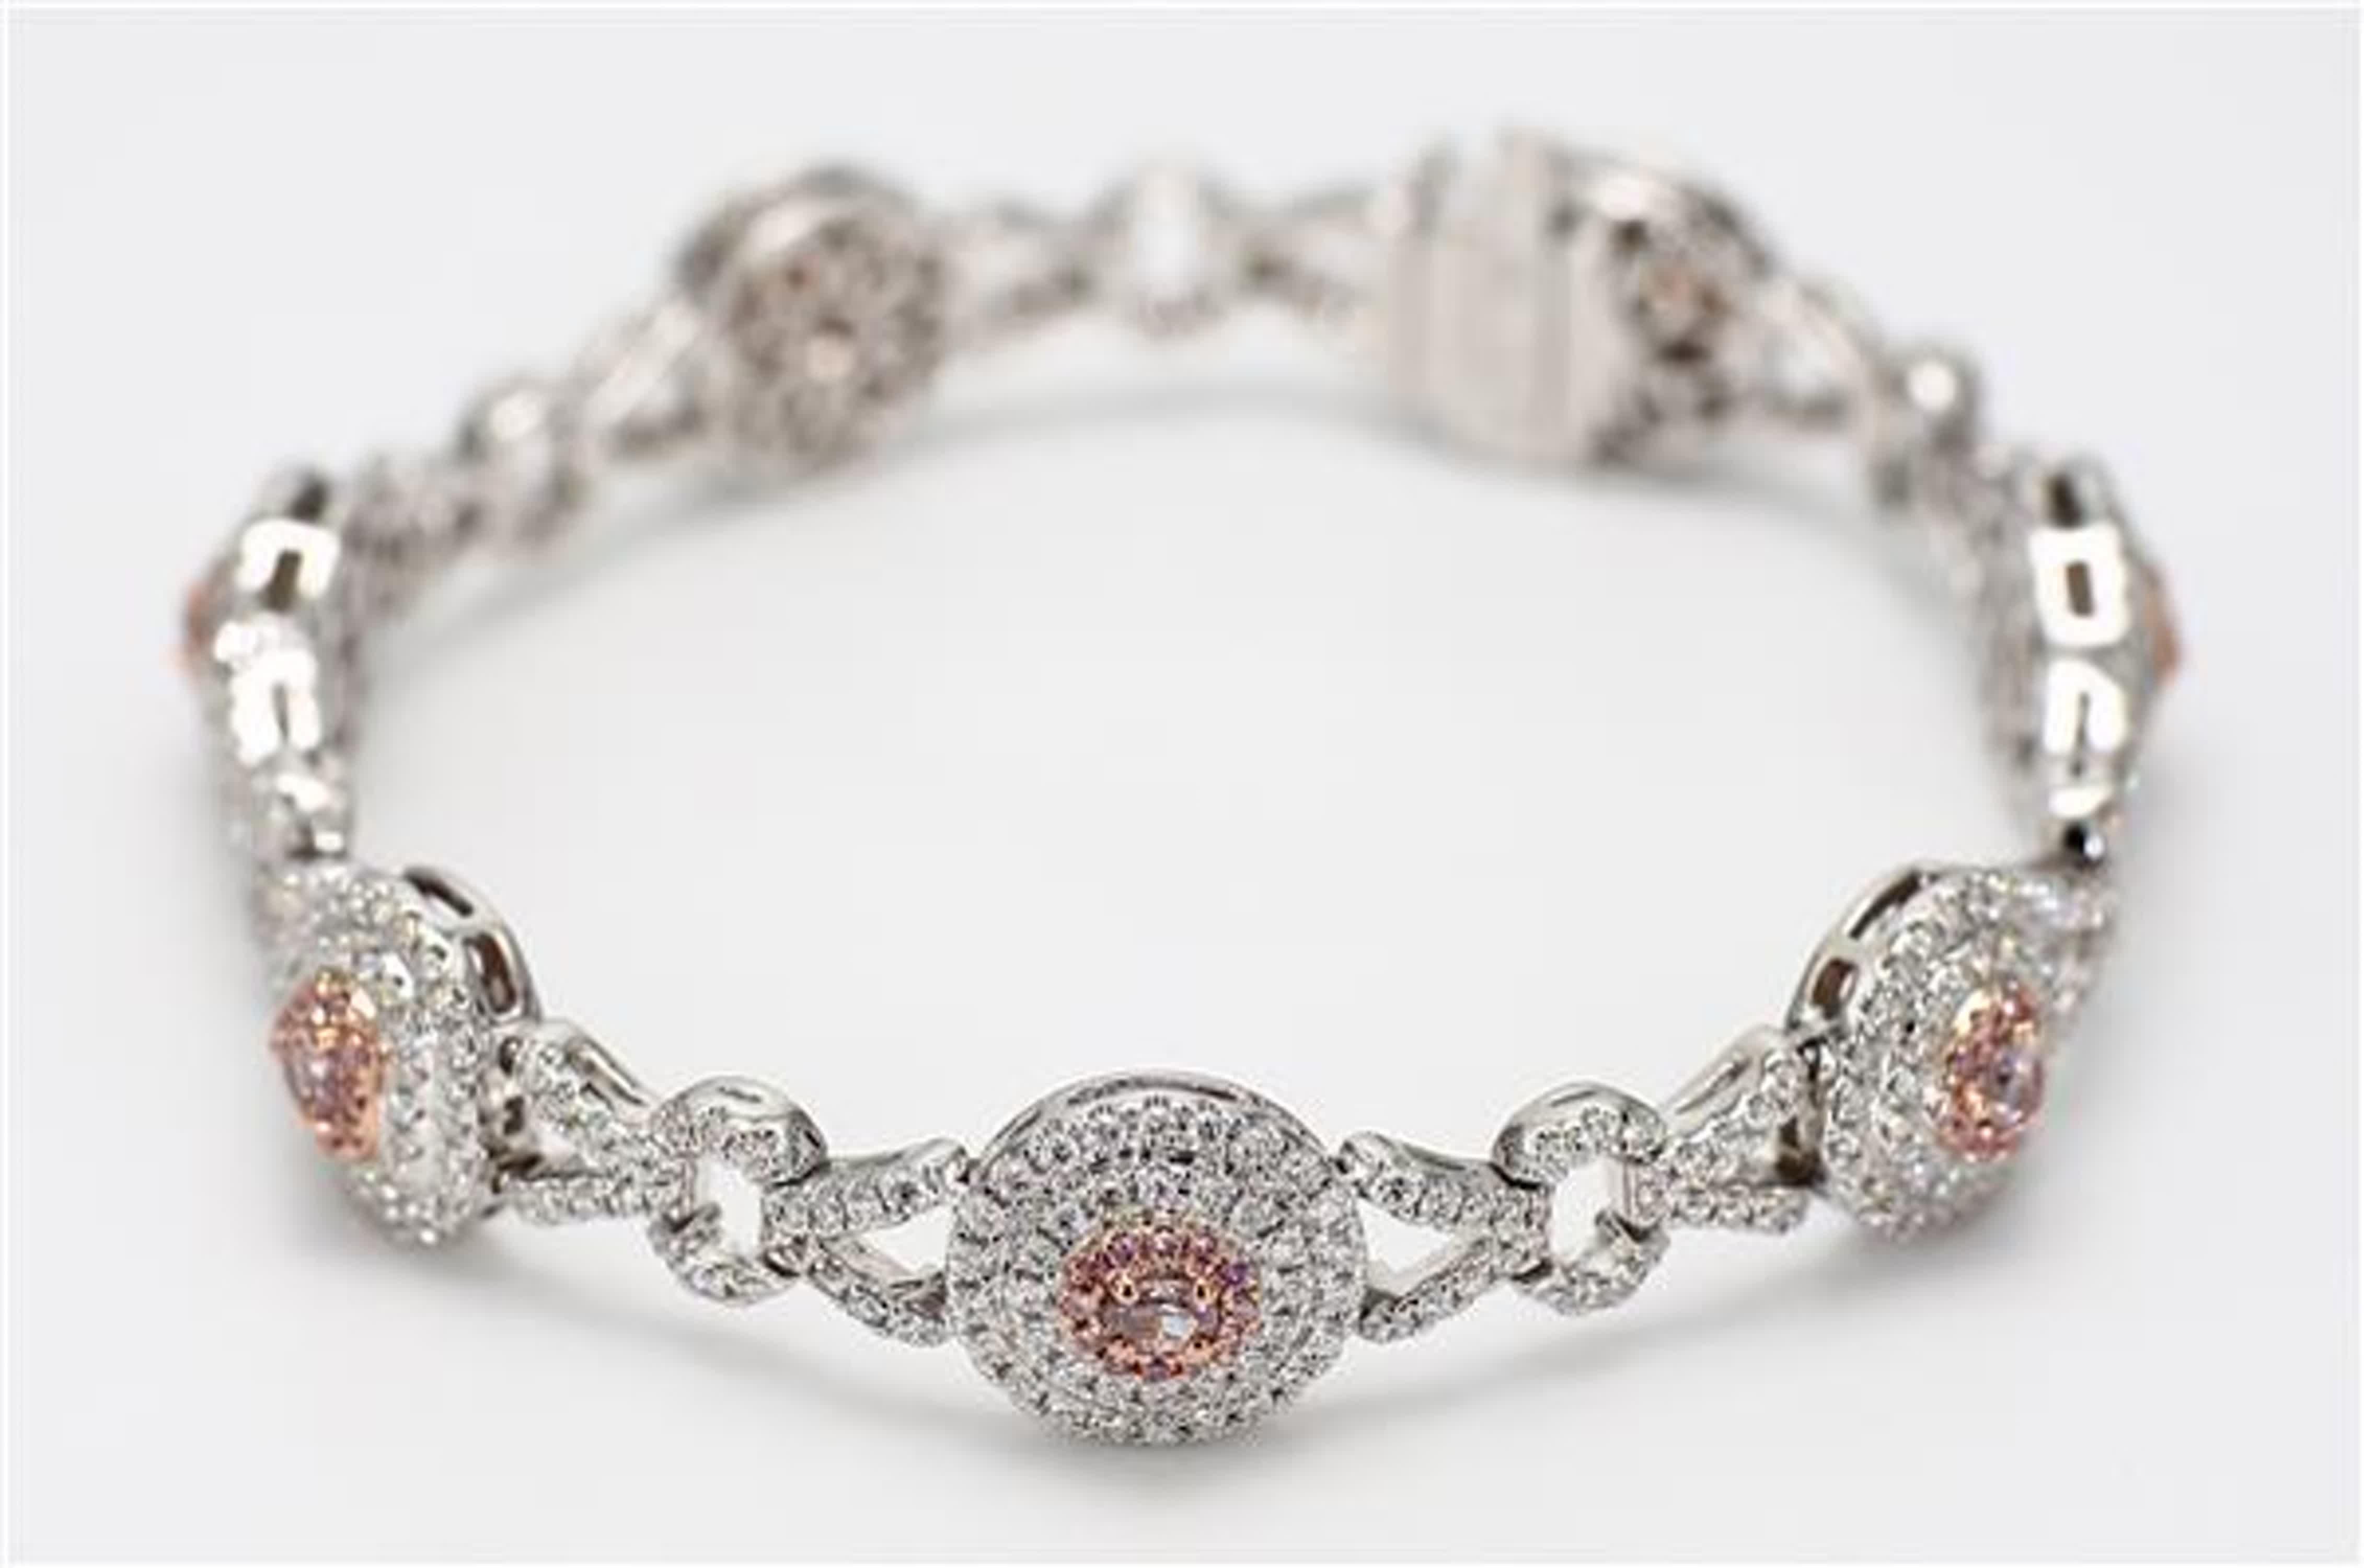 RareGemWorld's intriguing GIA certified diamond bracelet. Mounted in a beautiful 18K Rose and White Gold setting with natural pink heart cut diamonds, natural pink oval cut diamonds, and natural pink pear cut diamond. The pink diamonds are